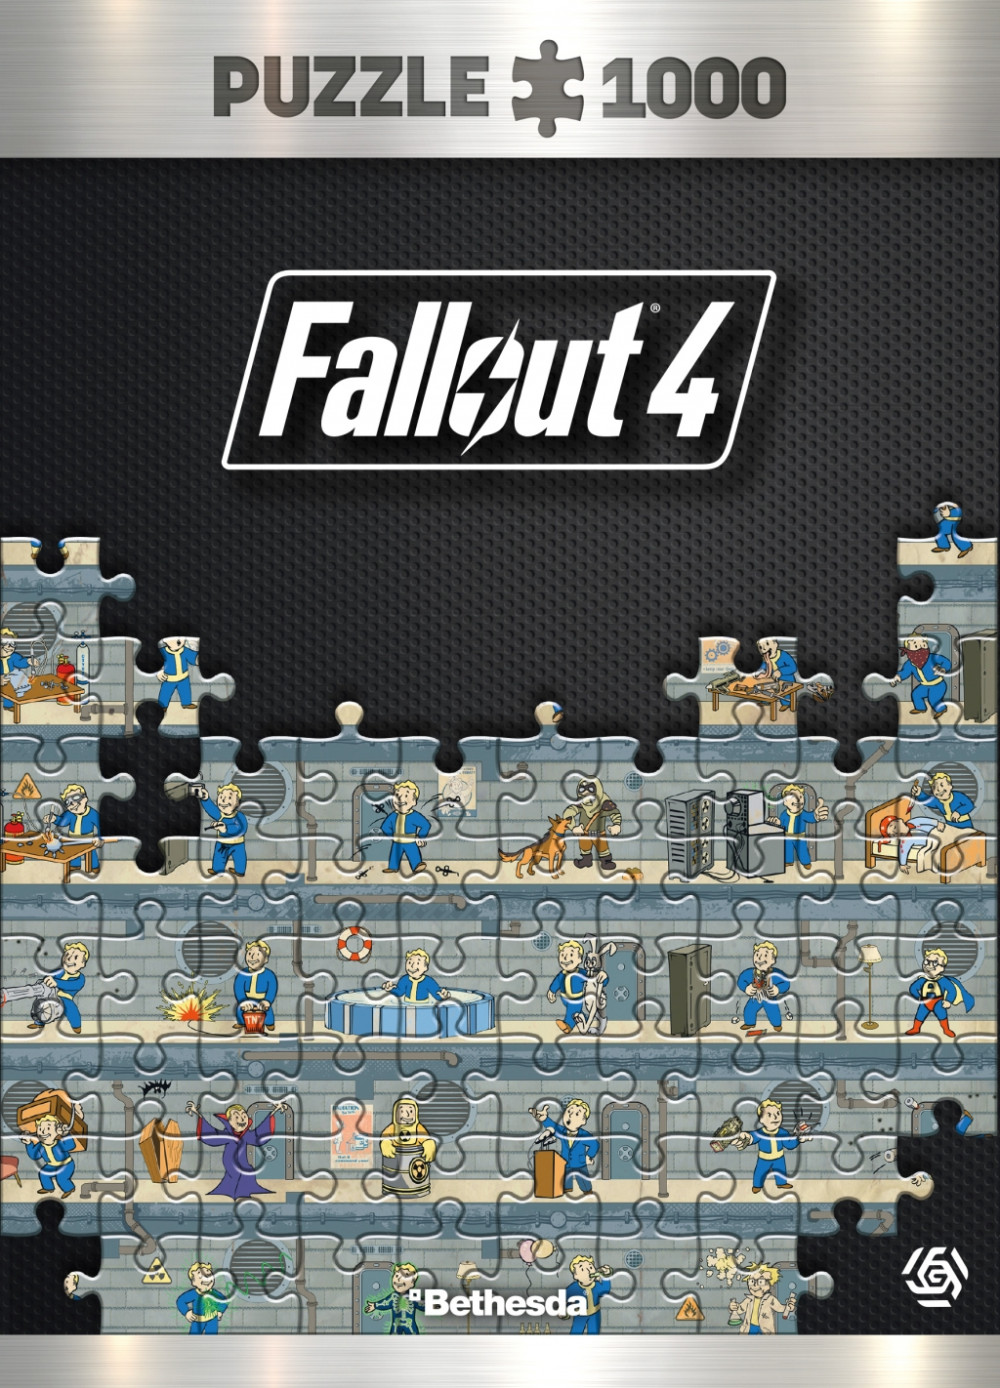 Puzzle Fallout 4 (1000 )